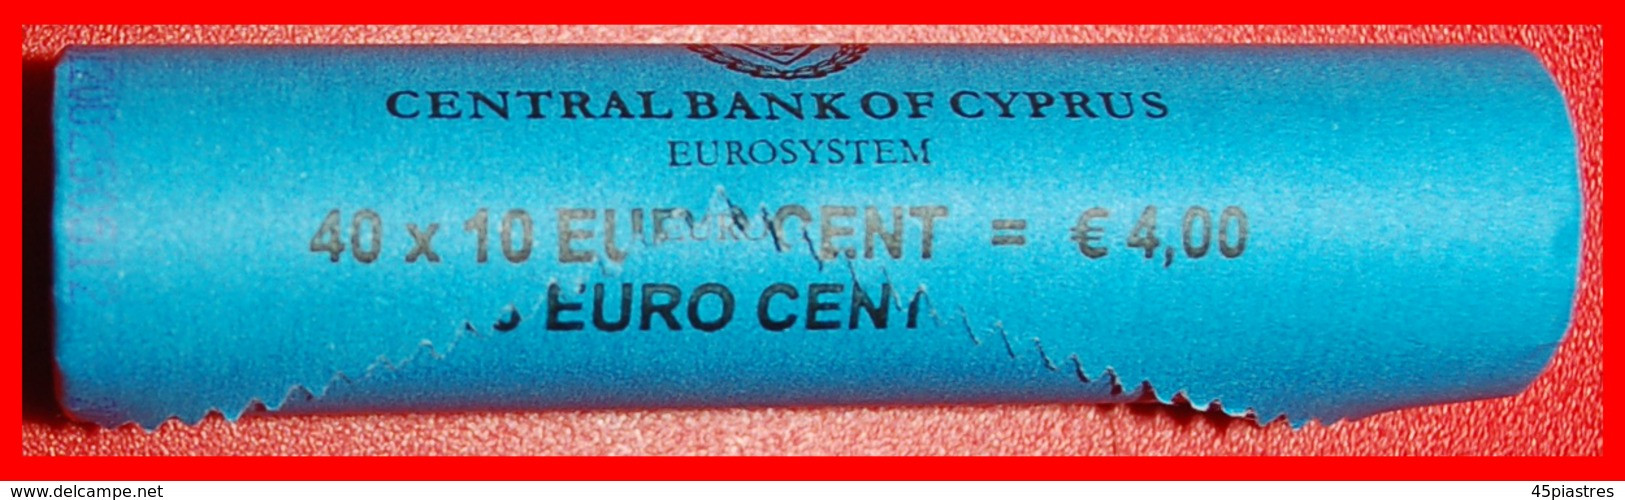 • GREECE: CYPRUS ★ 10 CENT 2012 UNC NORDIC GOLD ROLL UNCOMMON! SHIP! LOW START ★ NO RESERVE! - Rouleaux